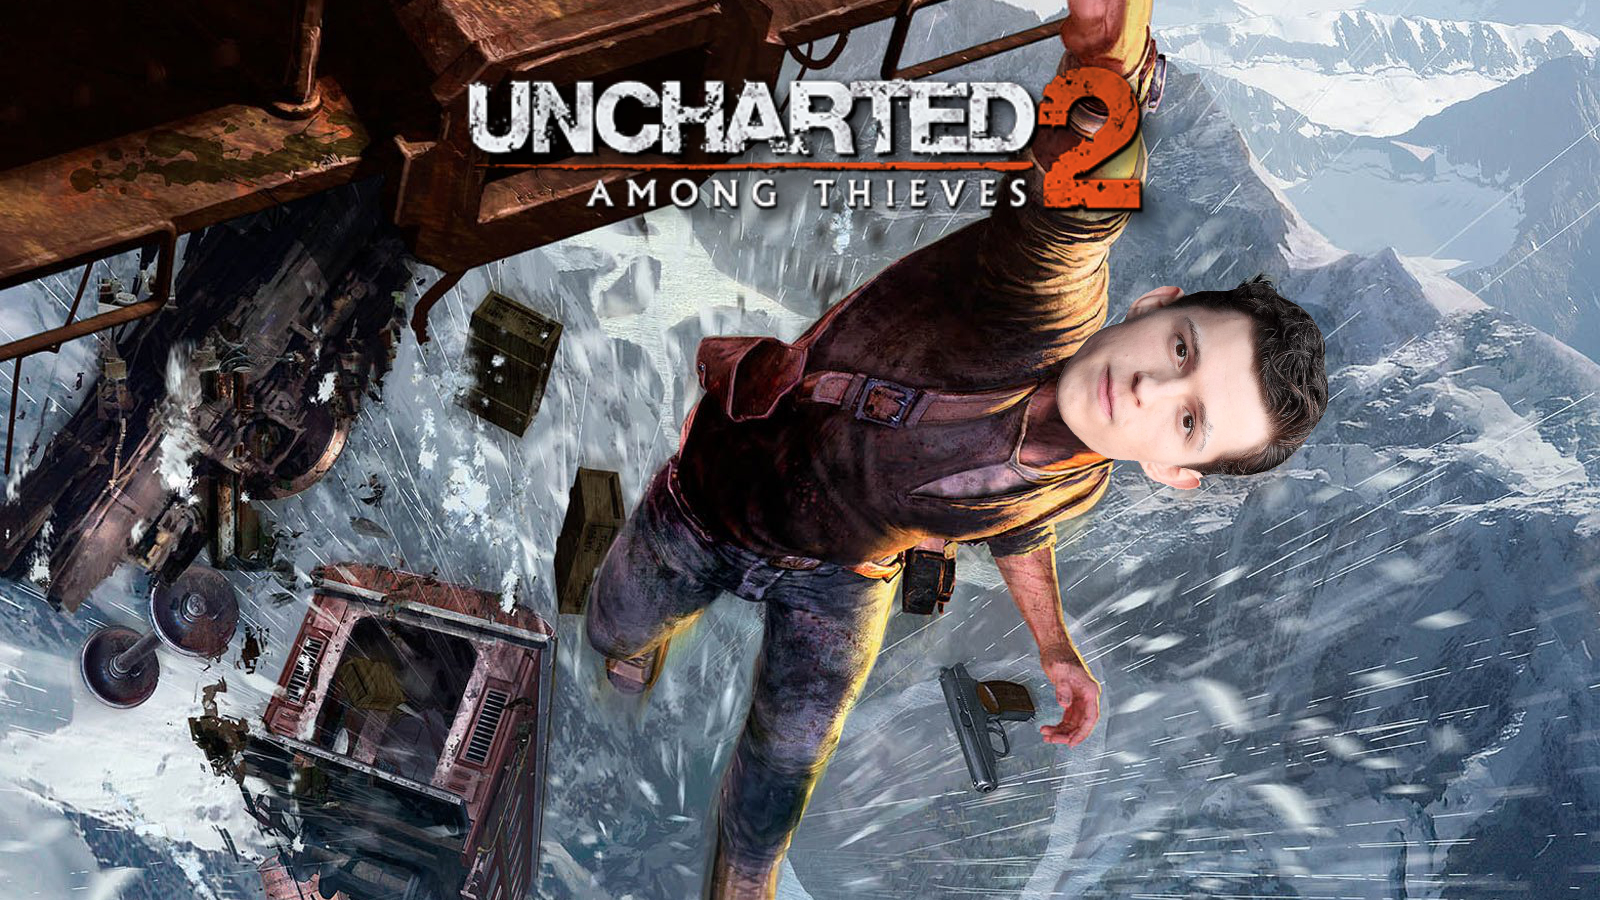 Uncharted sequel all-but-confirmed as film surpasses expectations | KitGuru